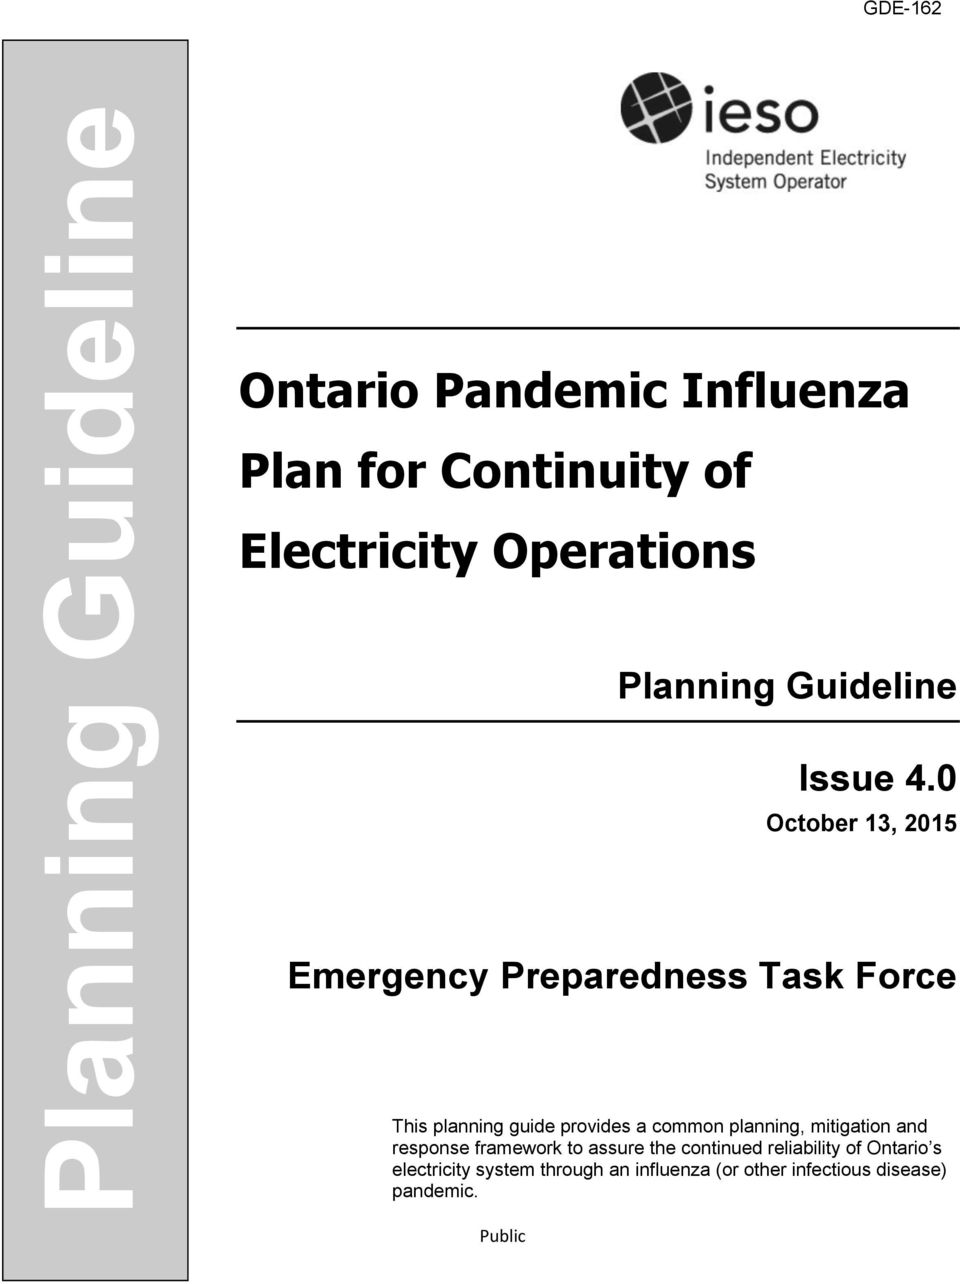 0 October 13, 2015 Emergency Preparedness Task Force This planning guide provides a common